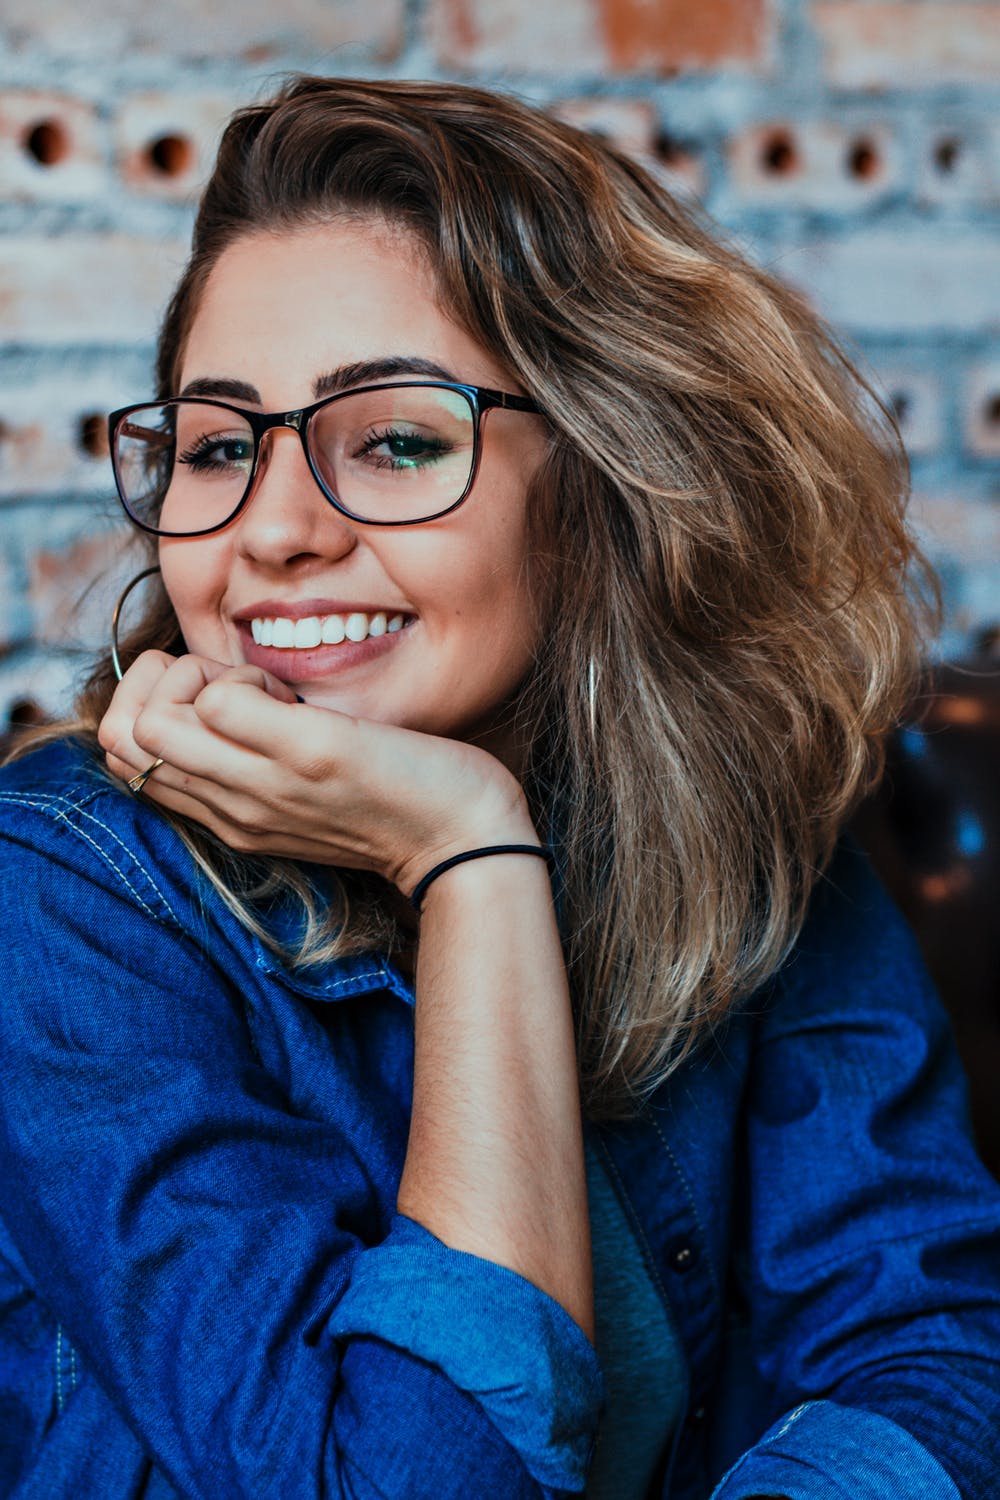 lady in a blue shirt wearing glasses and smiling